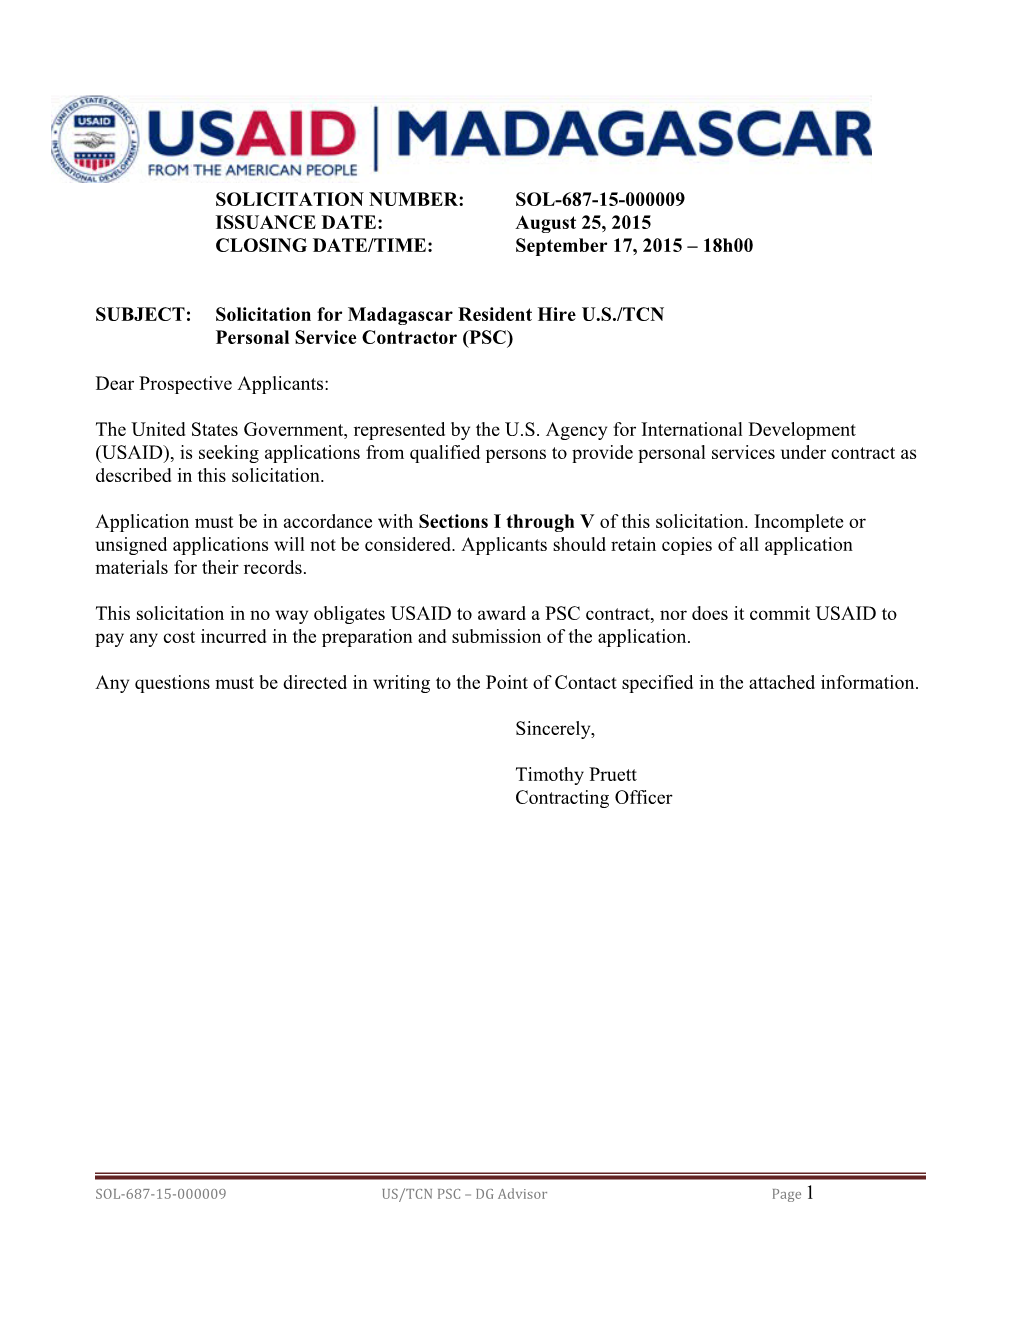 SUBJECT:Solicitation for Madagascar Resident Hire U.S./TCN